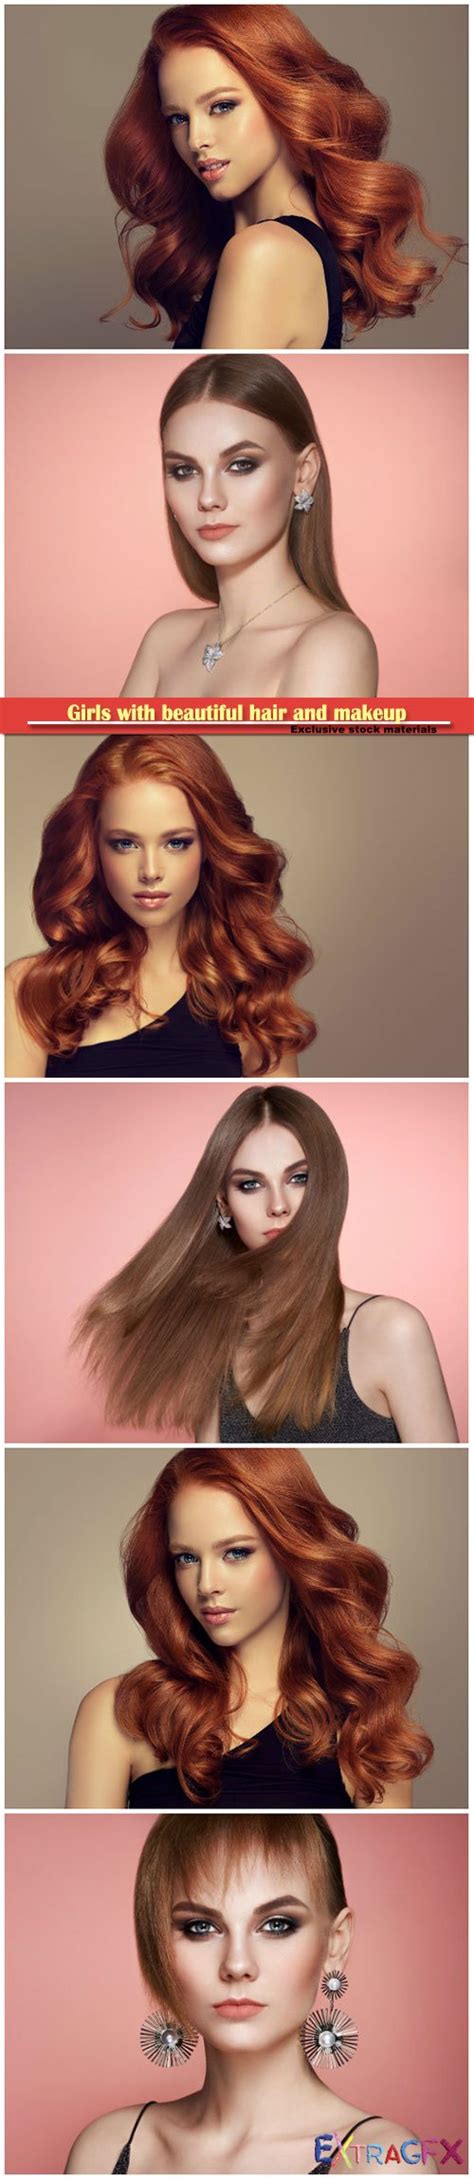 Girls With Beautiful Hair And Makeup Extragfx Free Graphic Portal